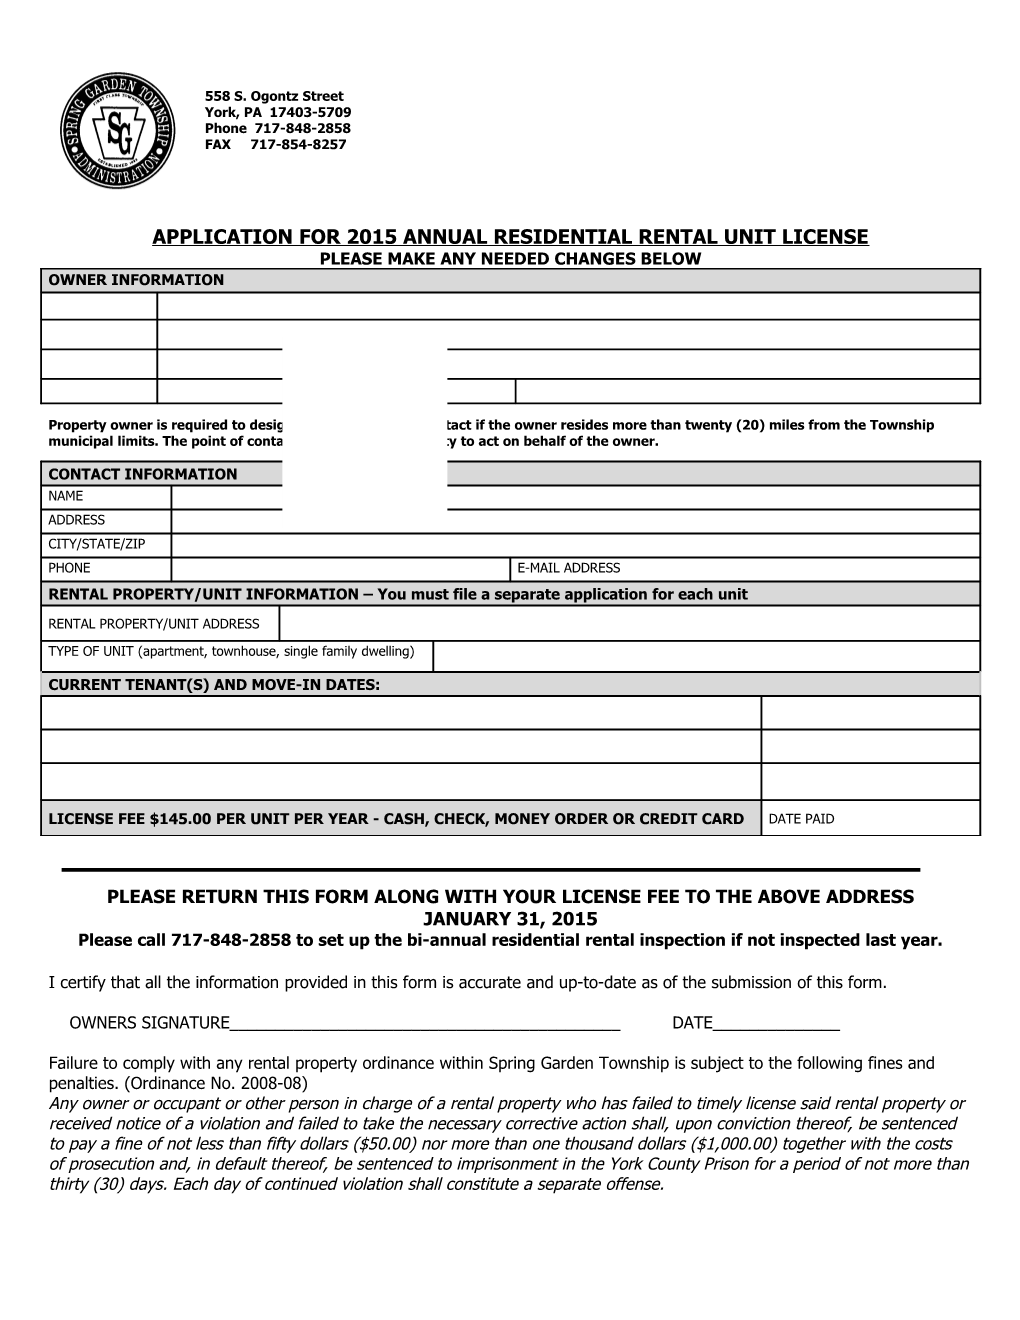 Application for Annual Residential Rental Unit License